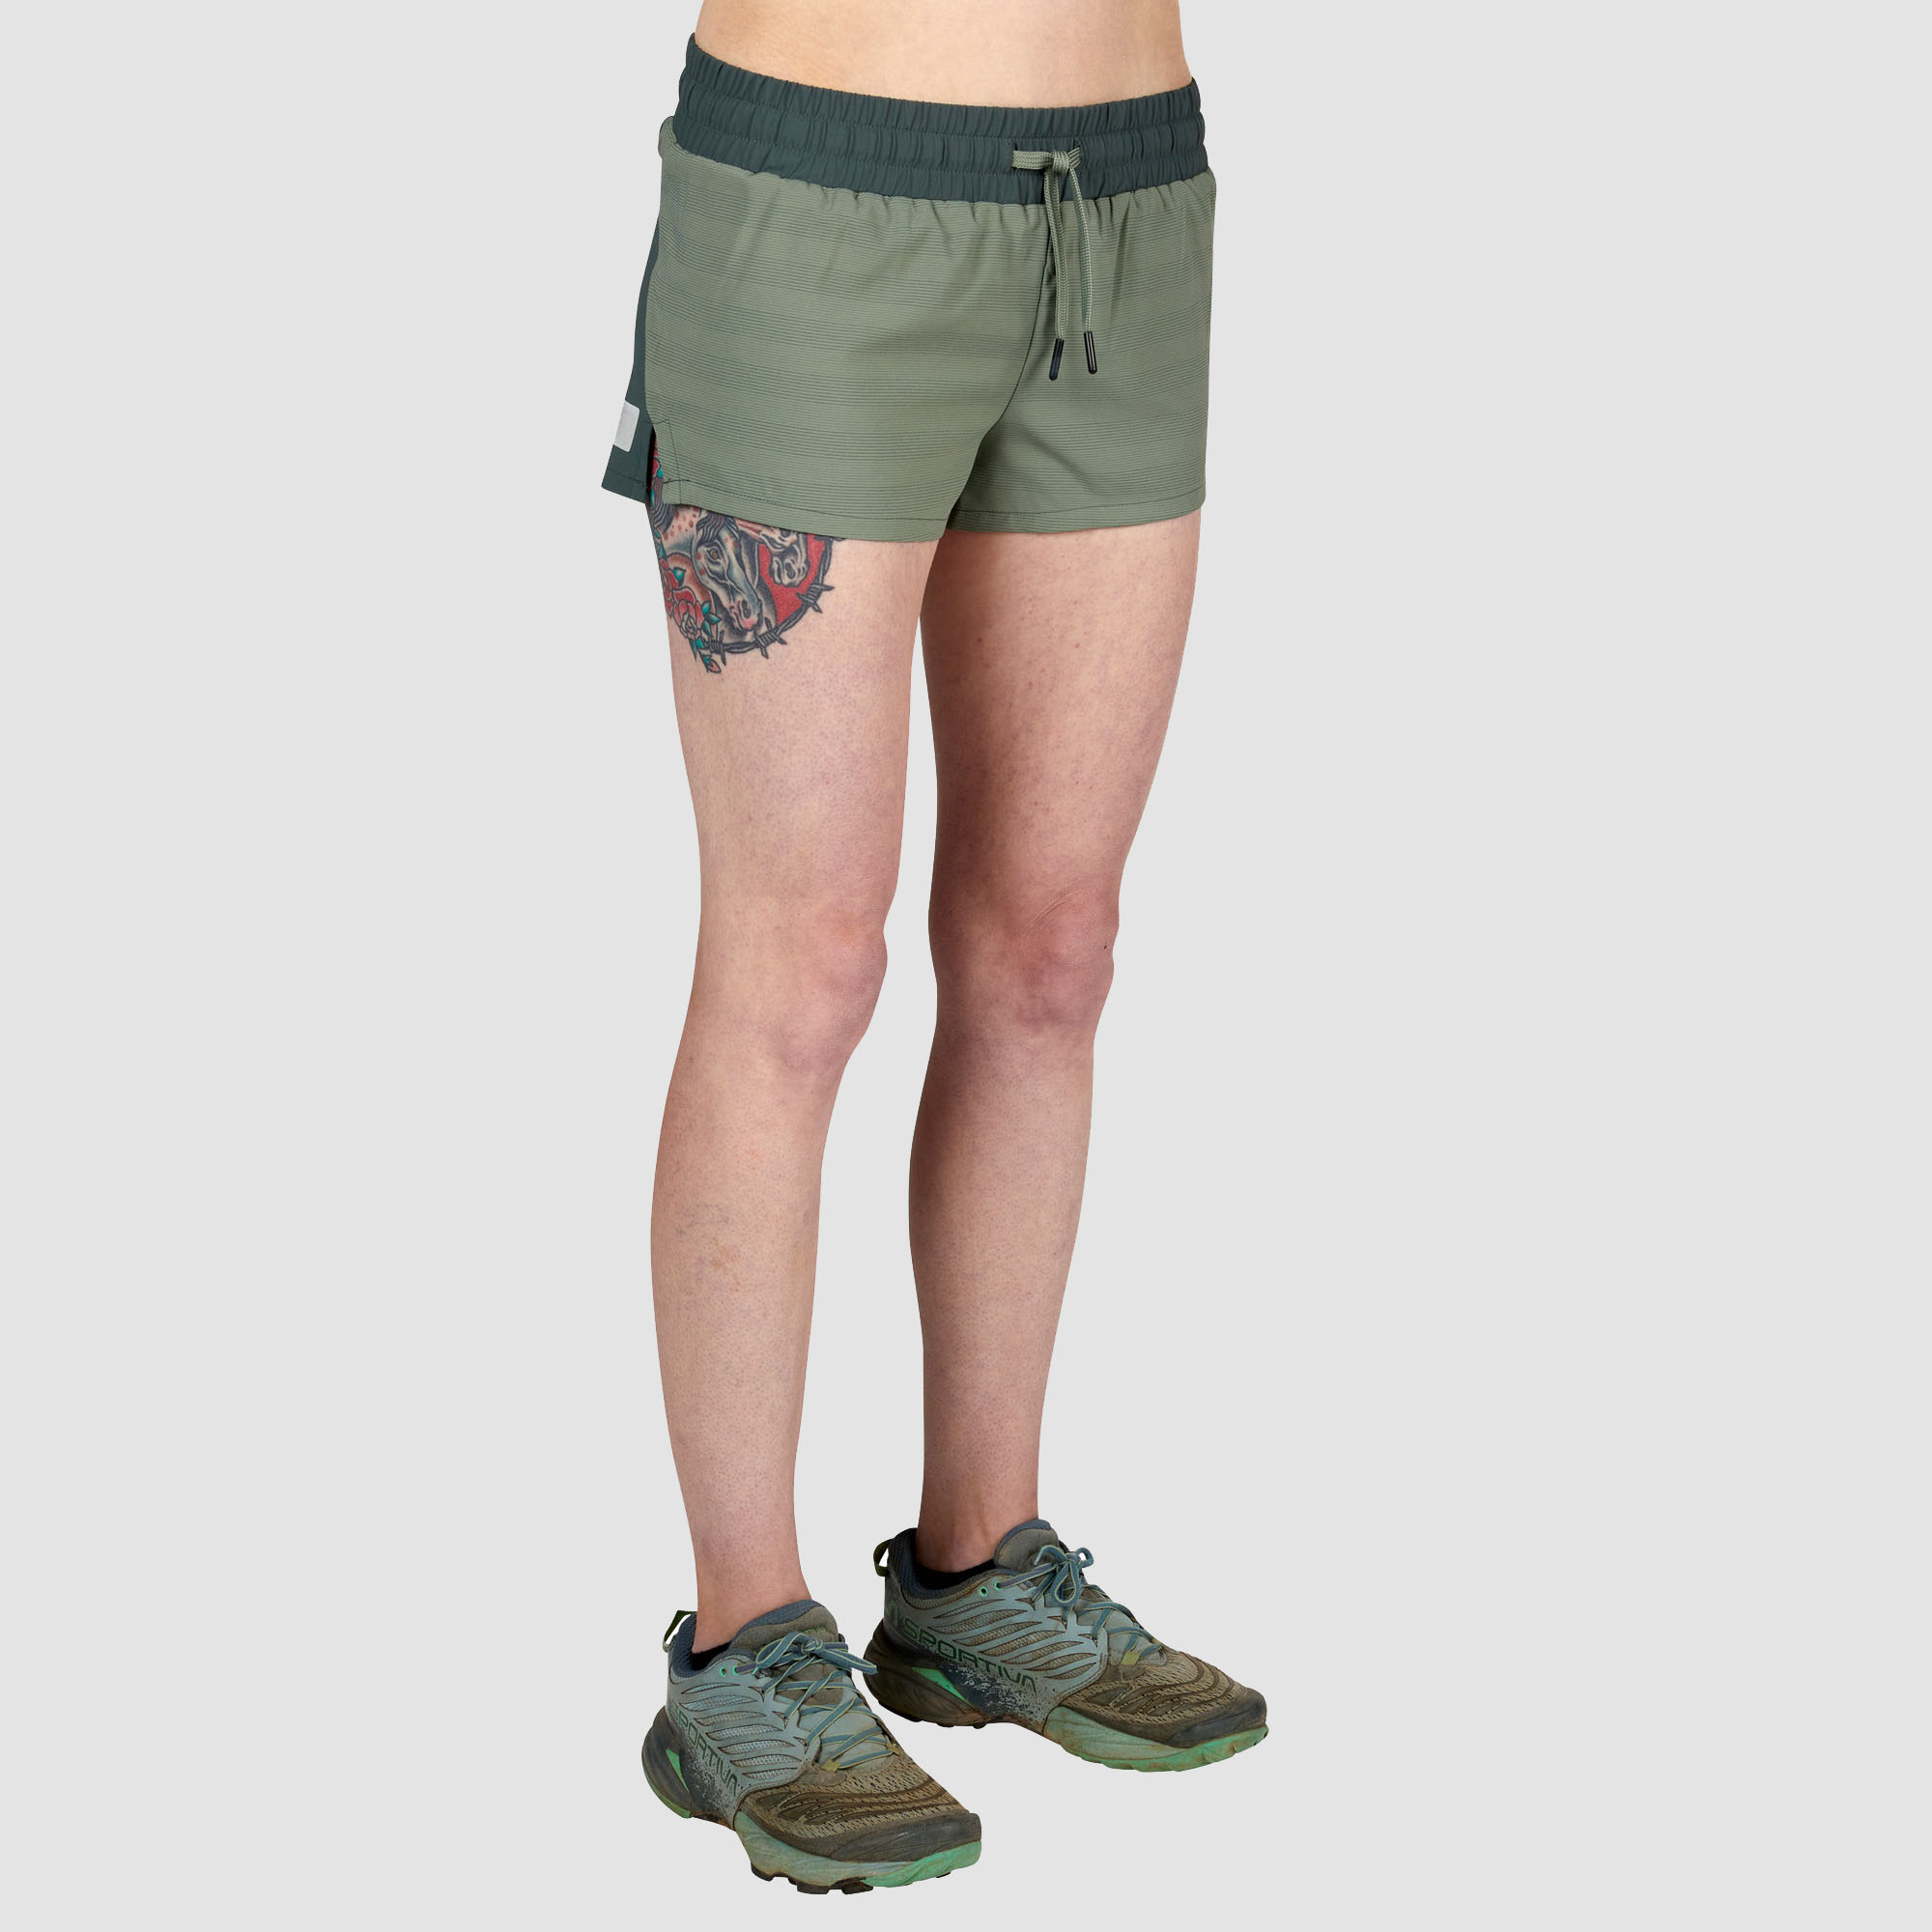 Ultimate Direction Women's Stratus Short - Prior Year in Camo Green Size Small